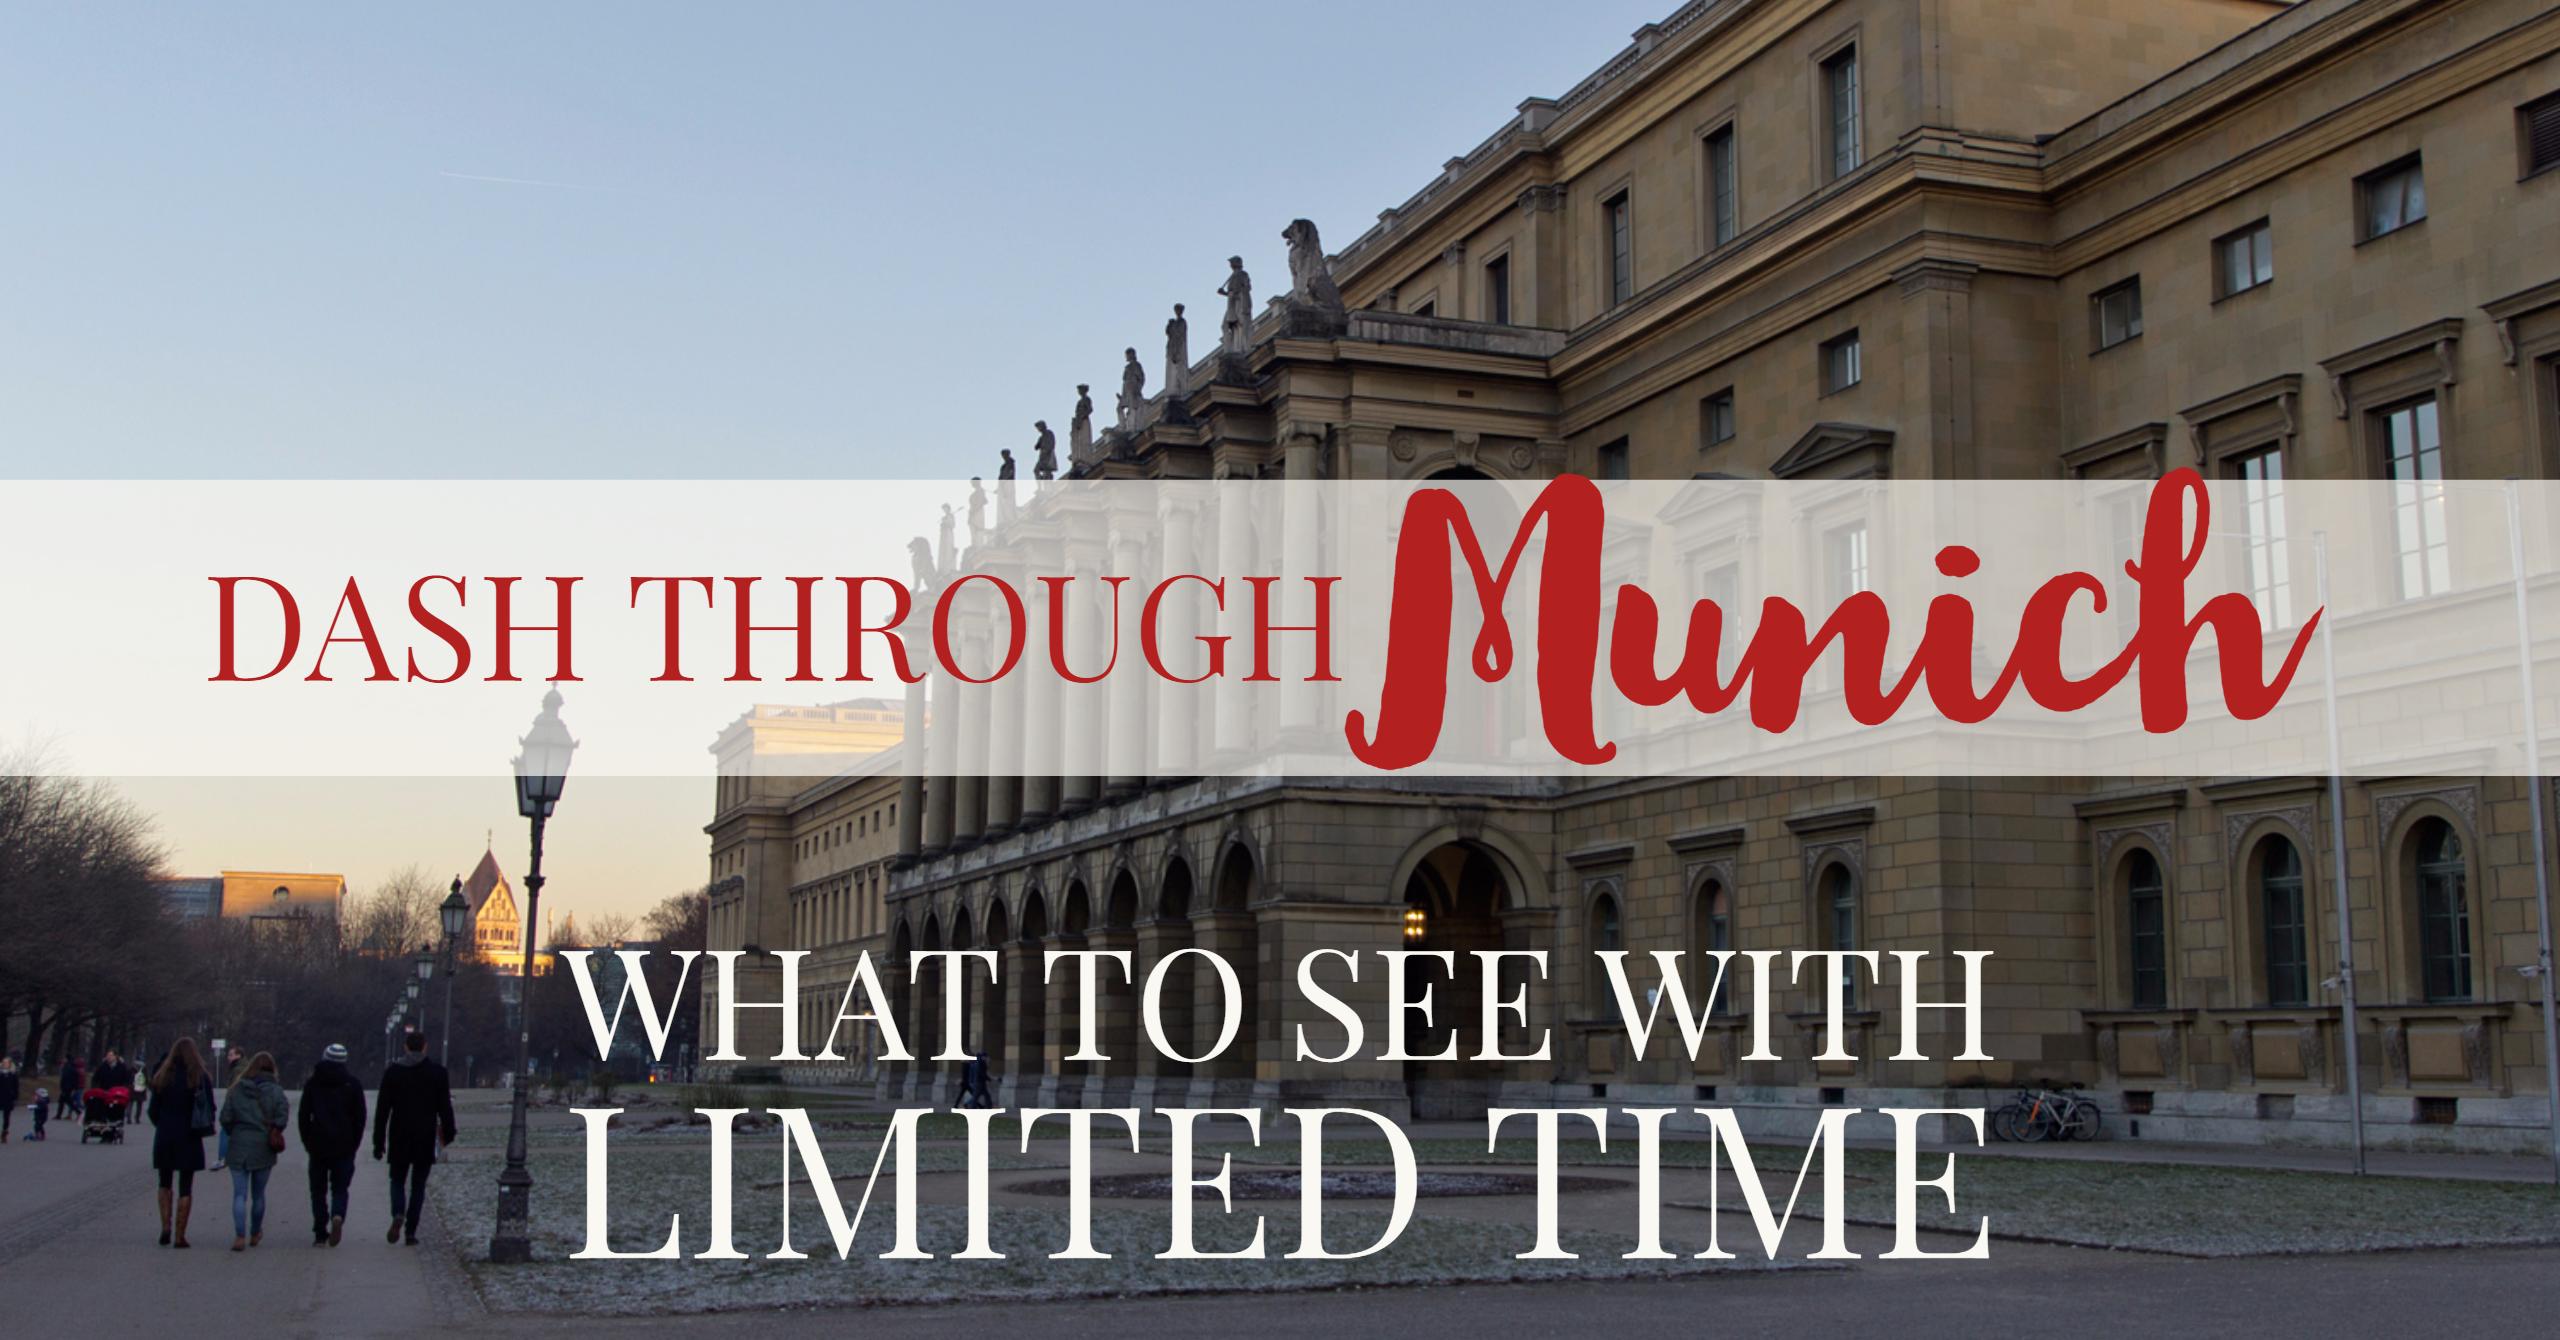 Dash Through Munich - What to do in Munich Germany with limited time | My Wandering Voyage travel blog